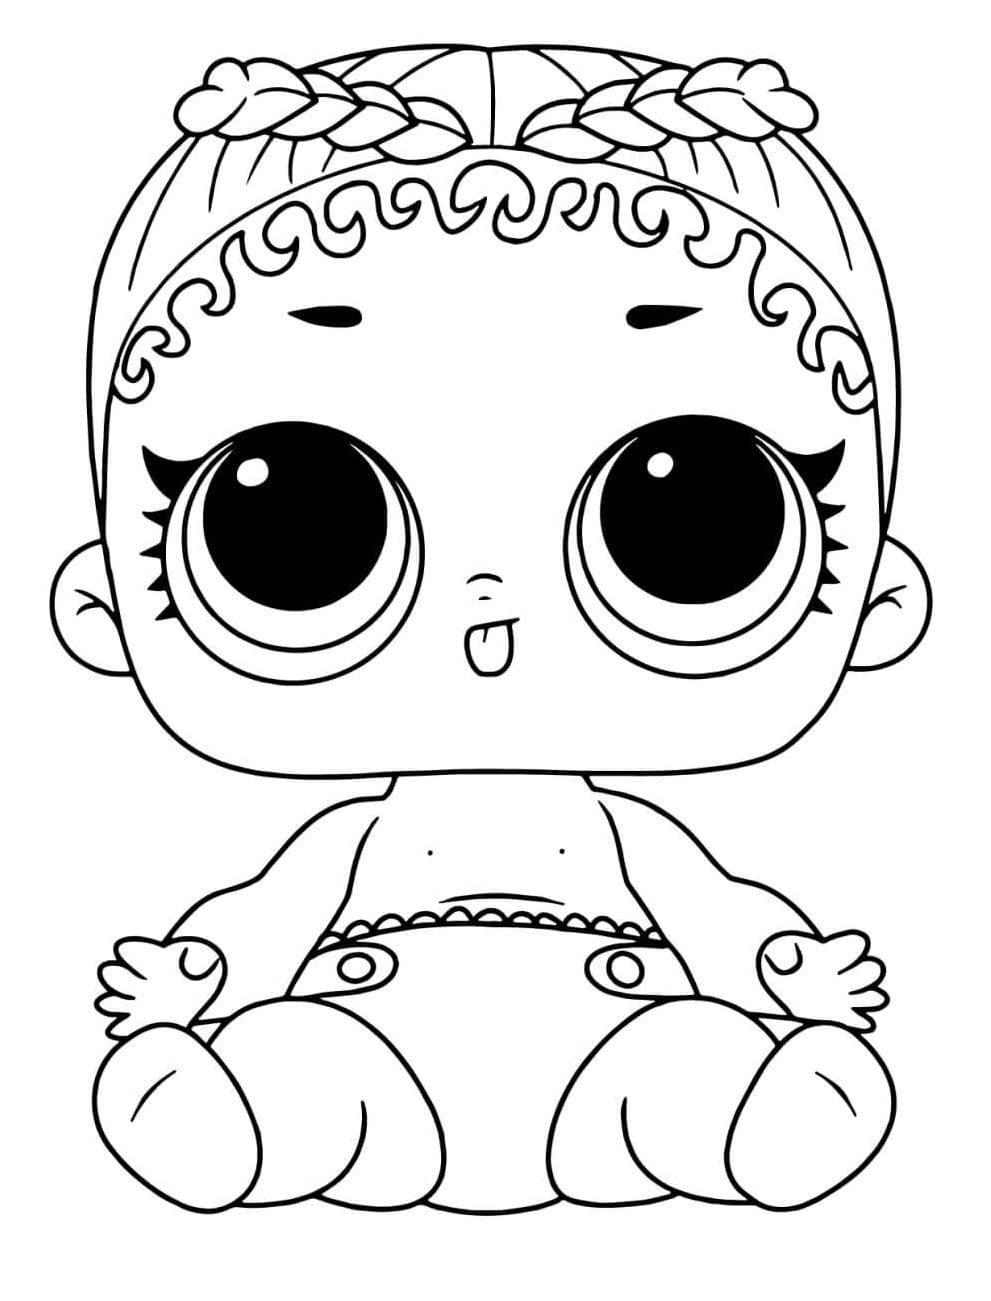 Lil M.C. Swag LOL coloring page